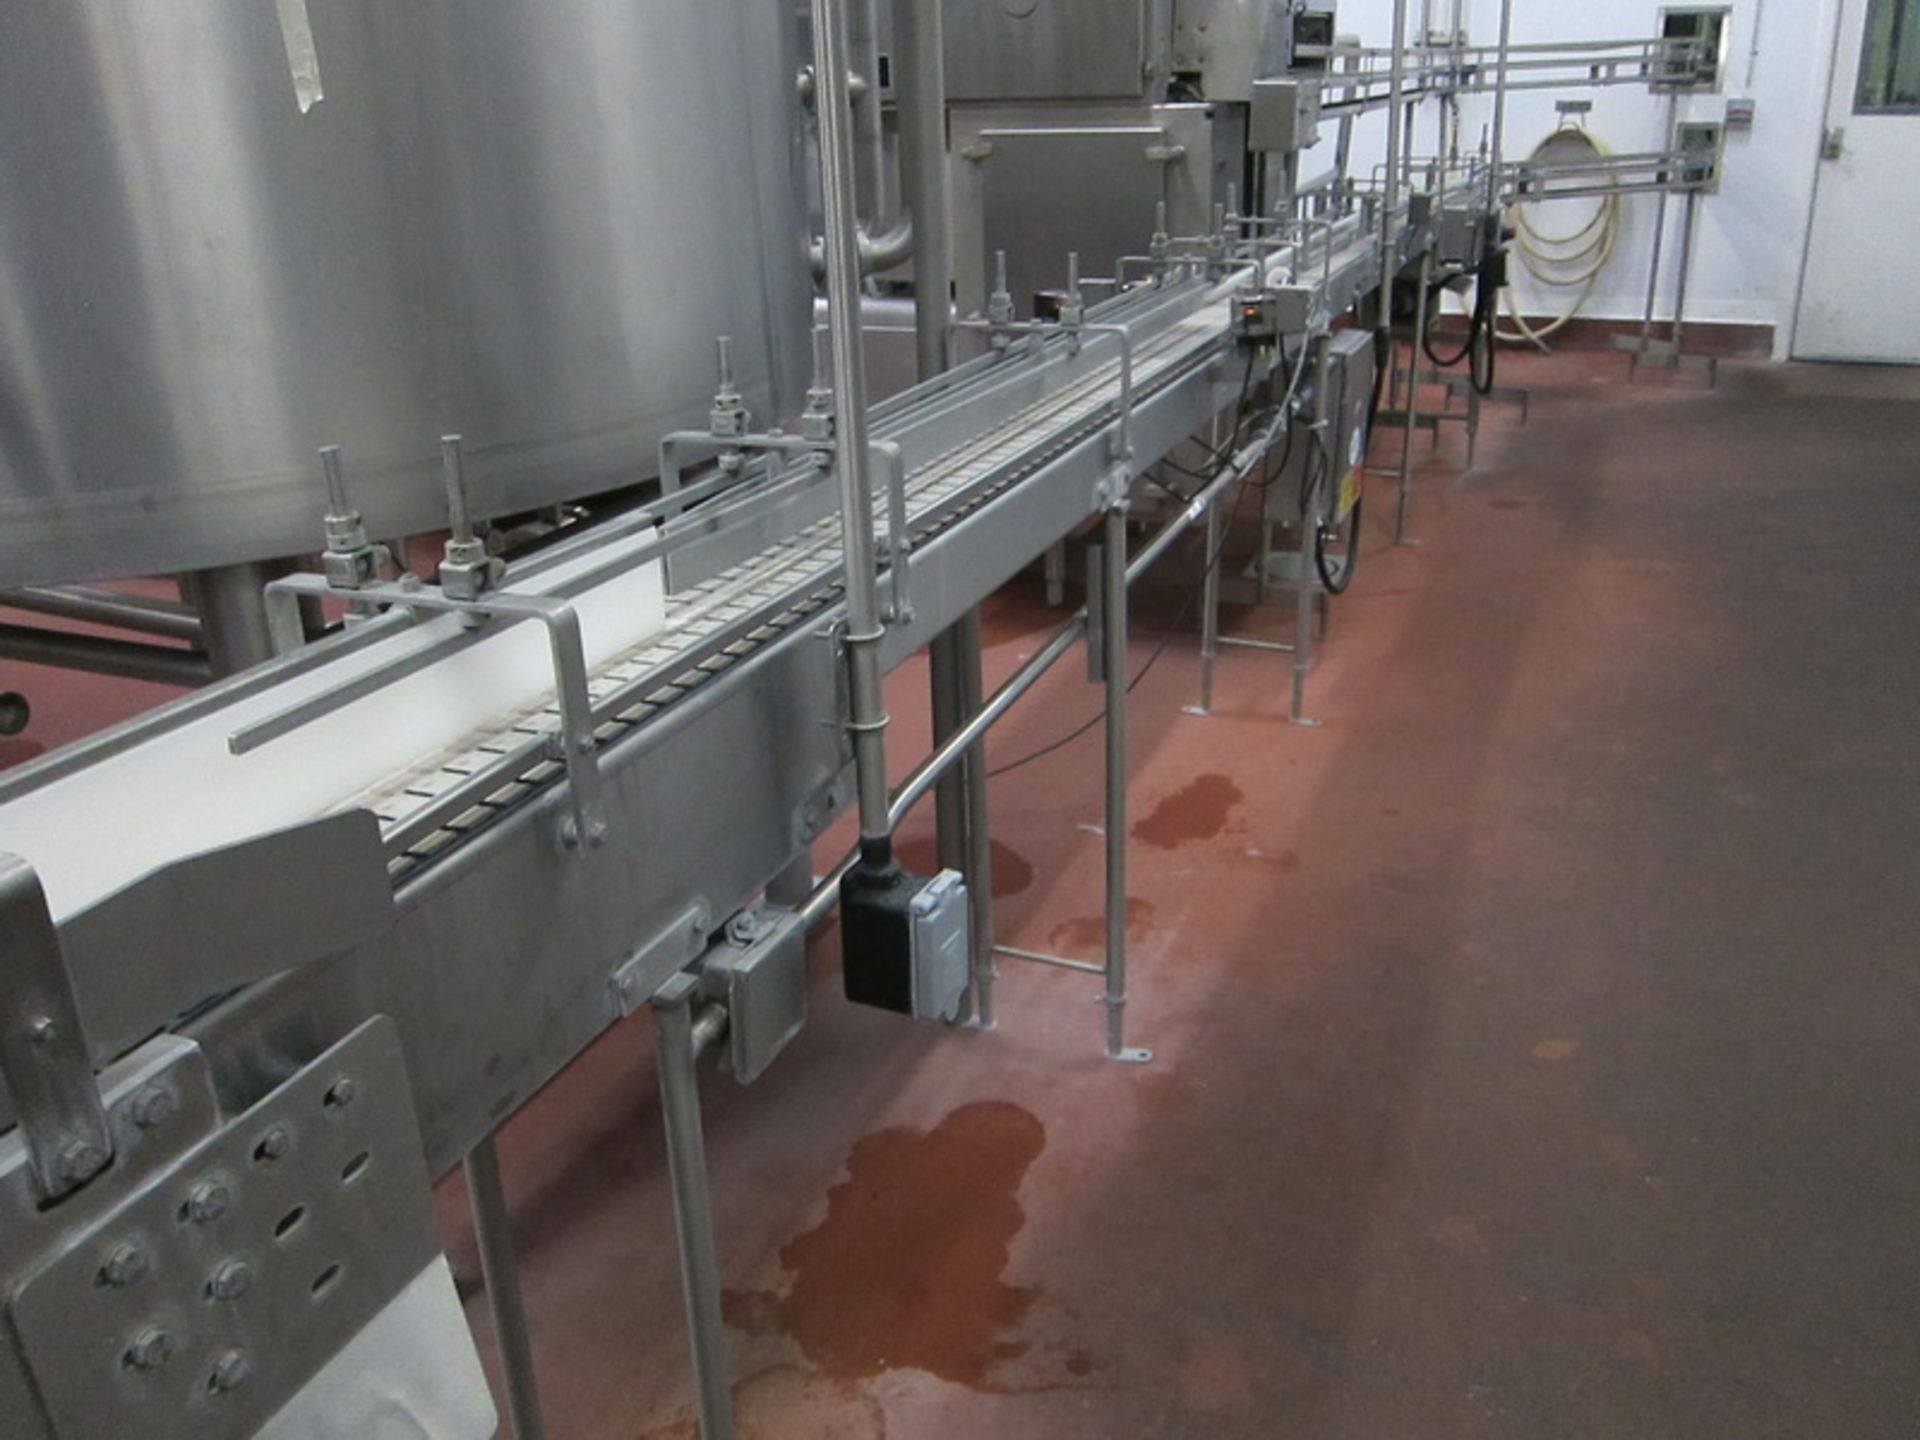 [Lot] Dairy Conveyor Corp. table top conveyors, extending from filling room to checkweigh in tray - Image 2 of 8